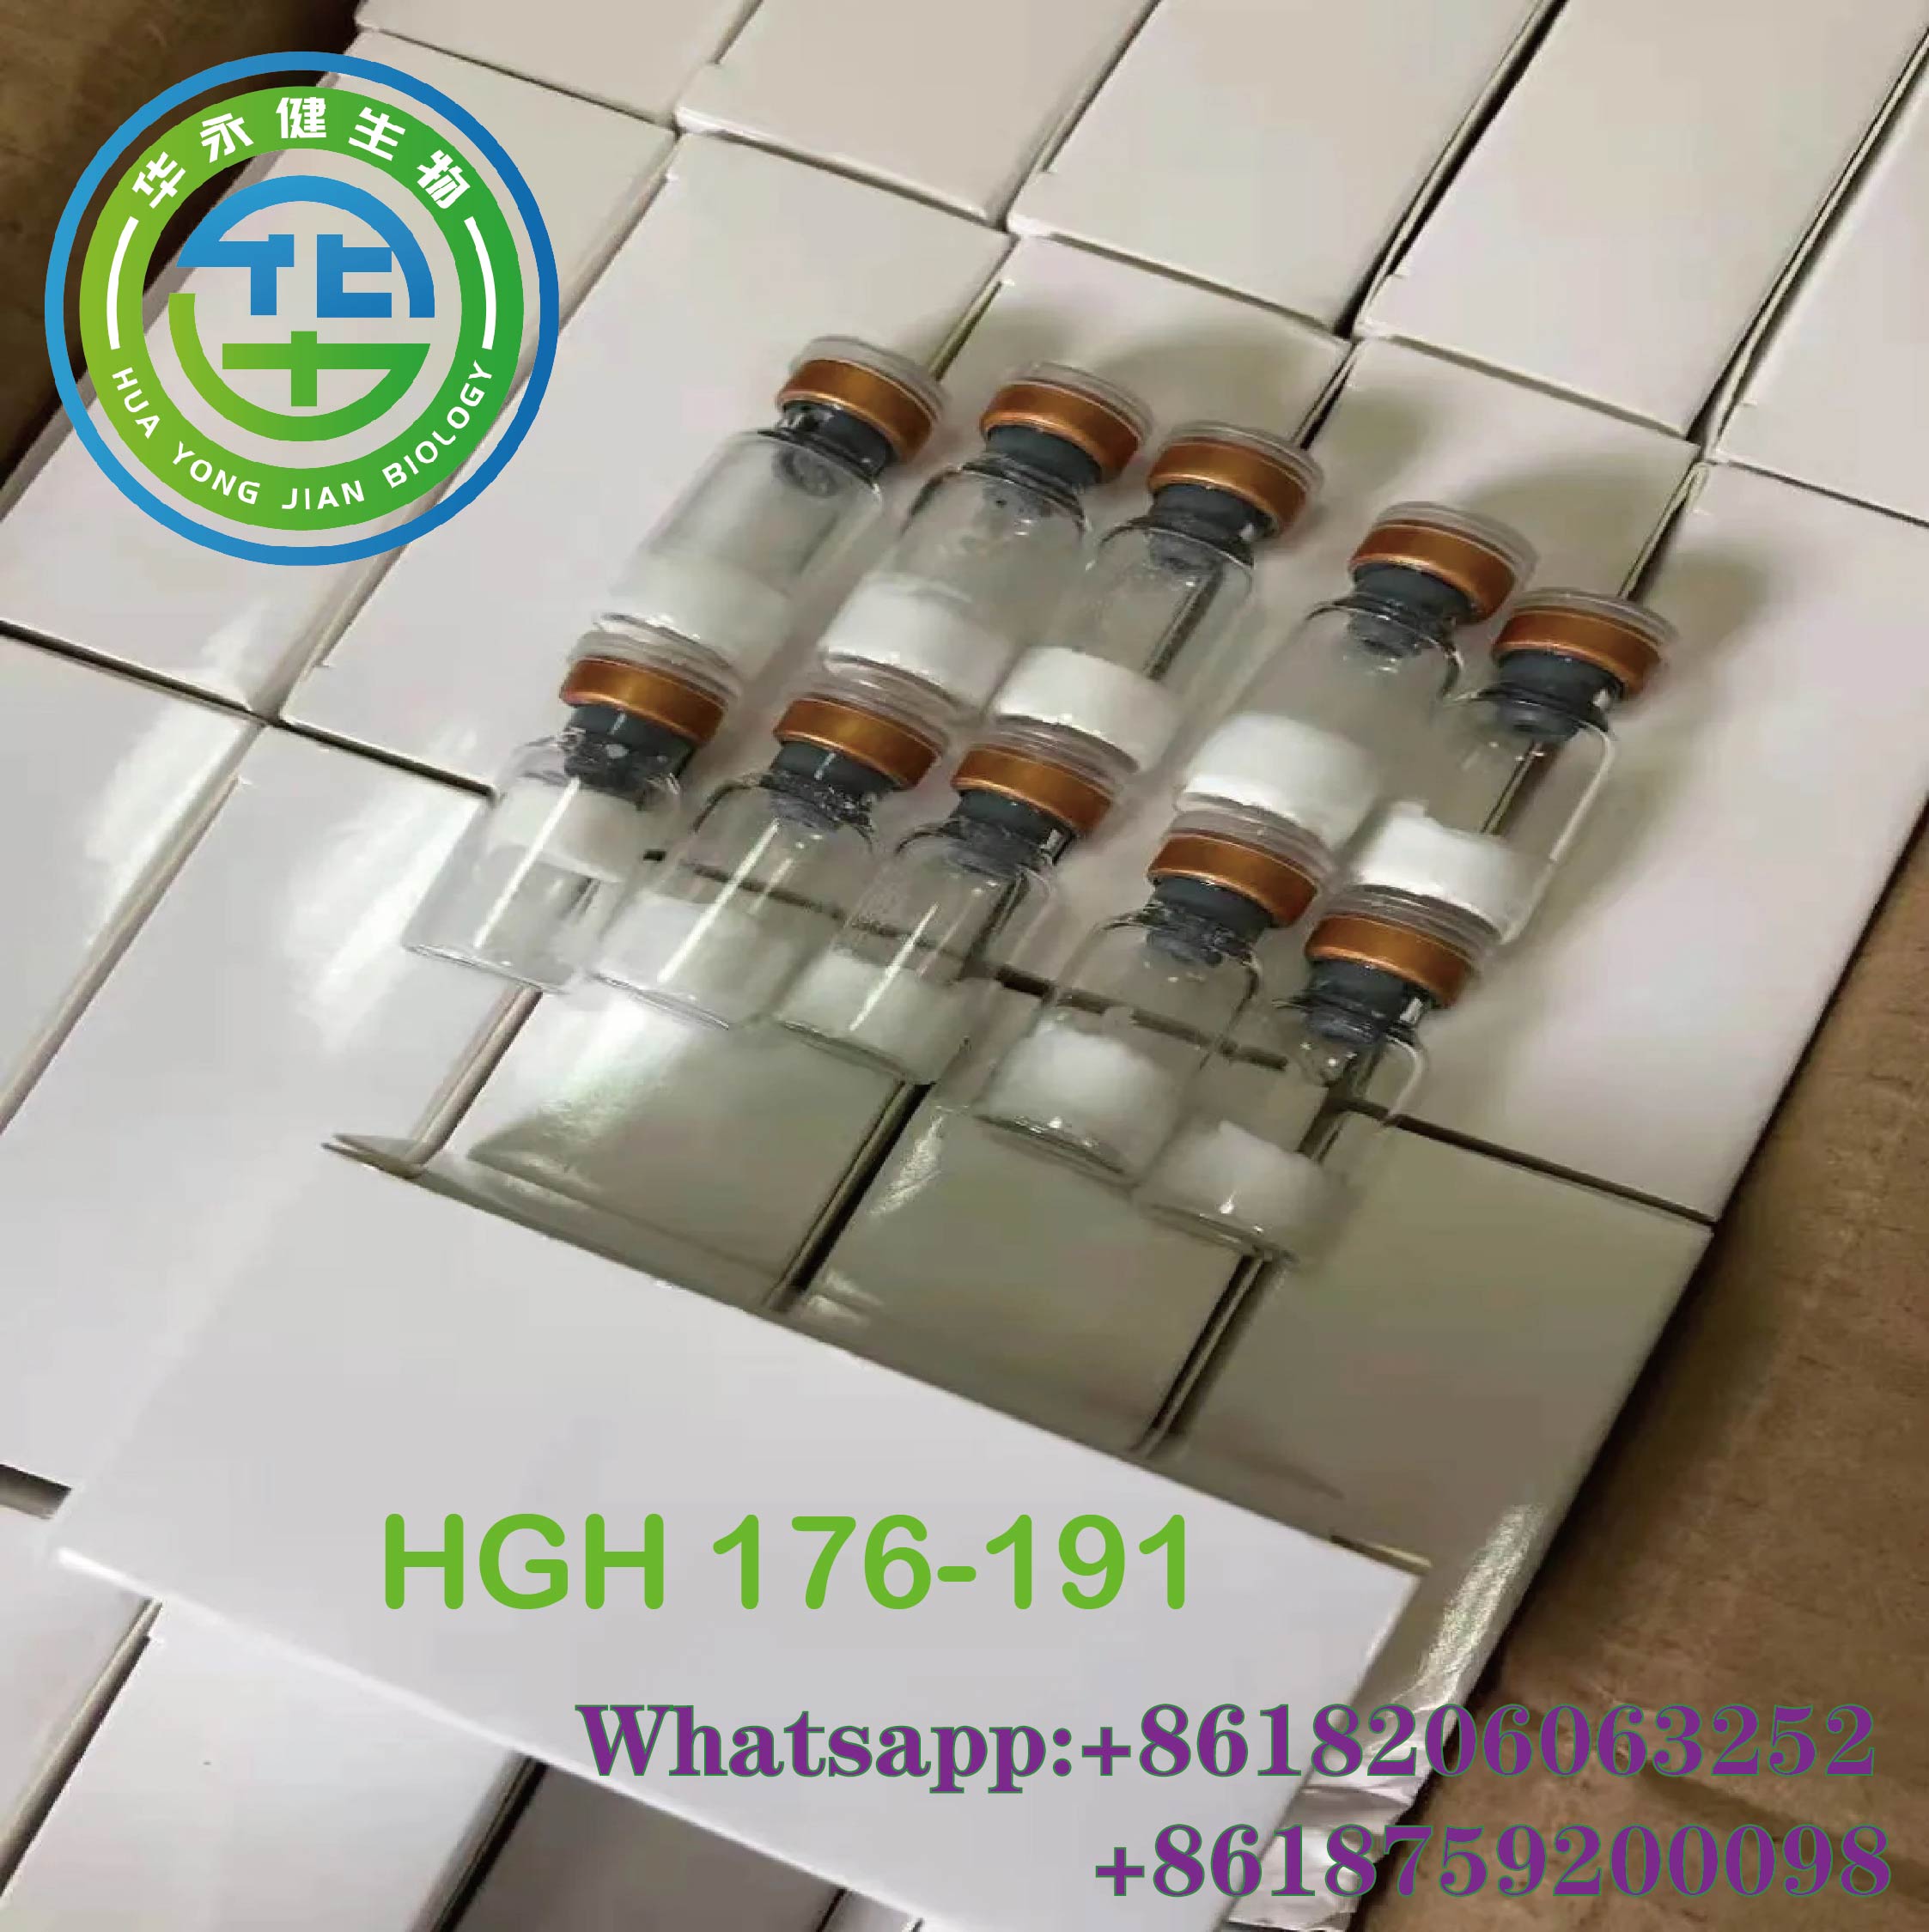 Weight Lossing Blue / Green / Black / Brown Top HGH Human Growth Hormone HGH 176-191 Featured Image